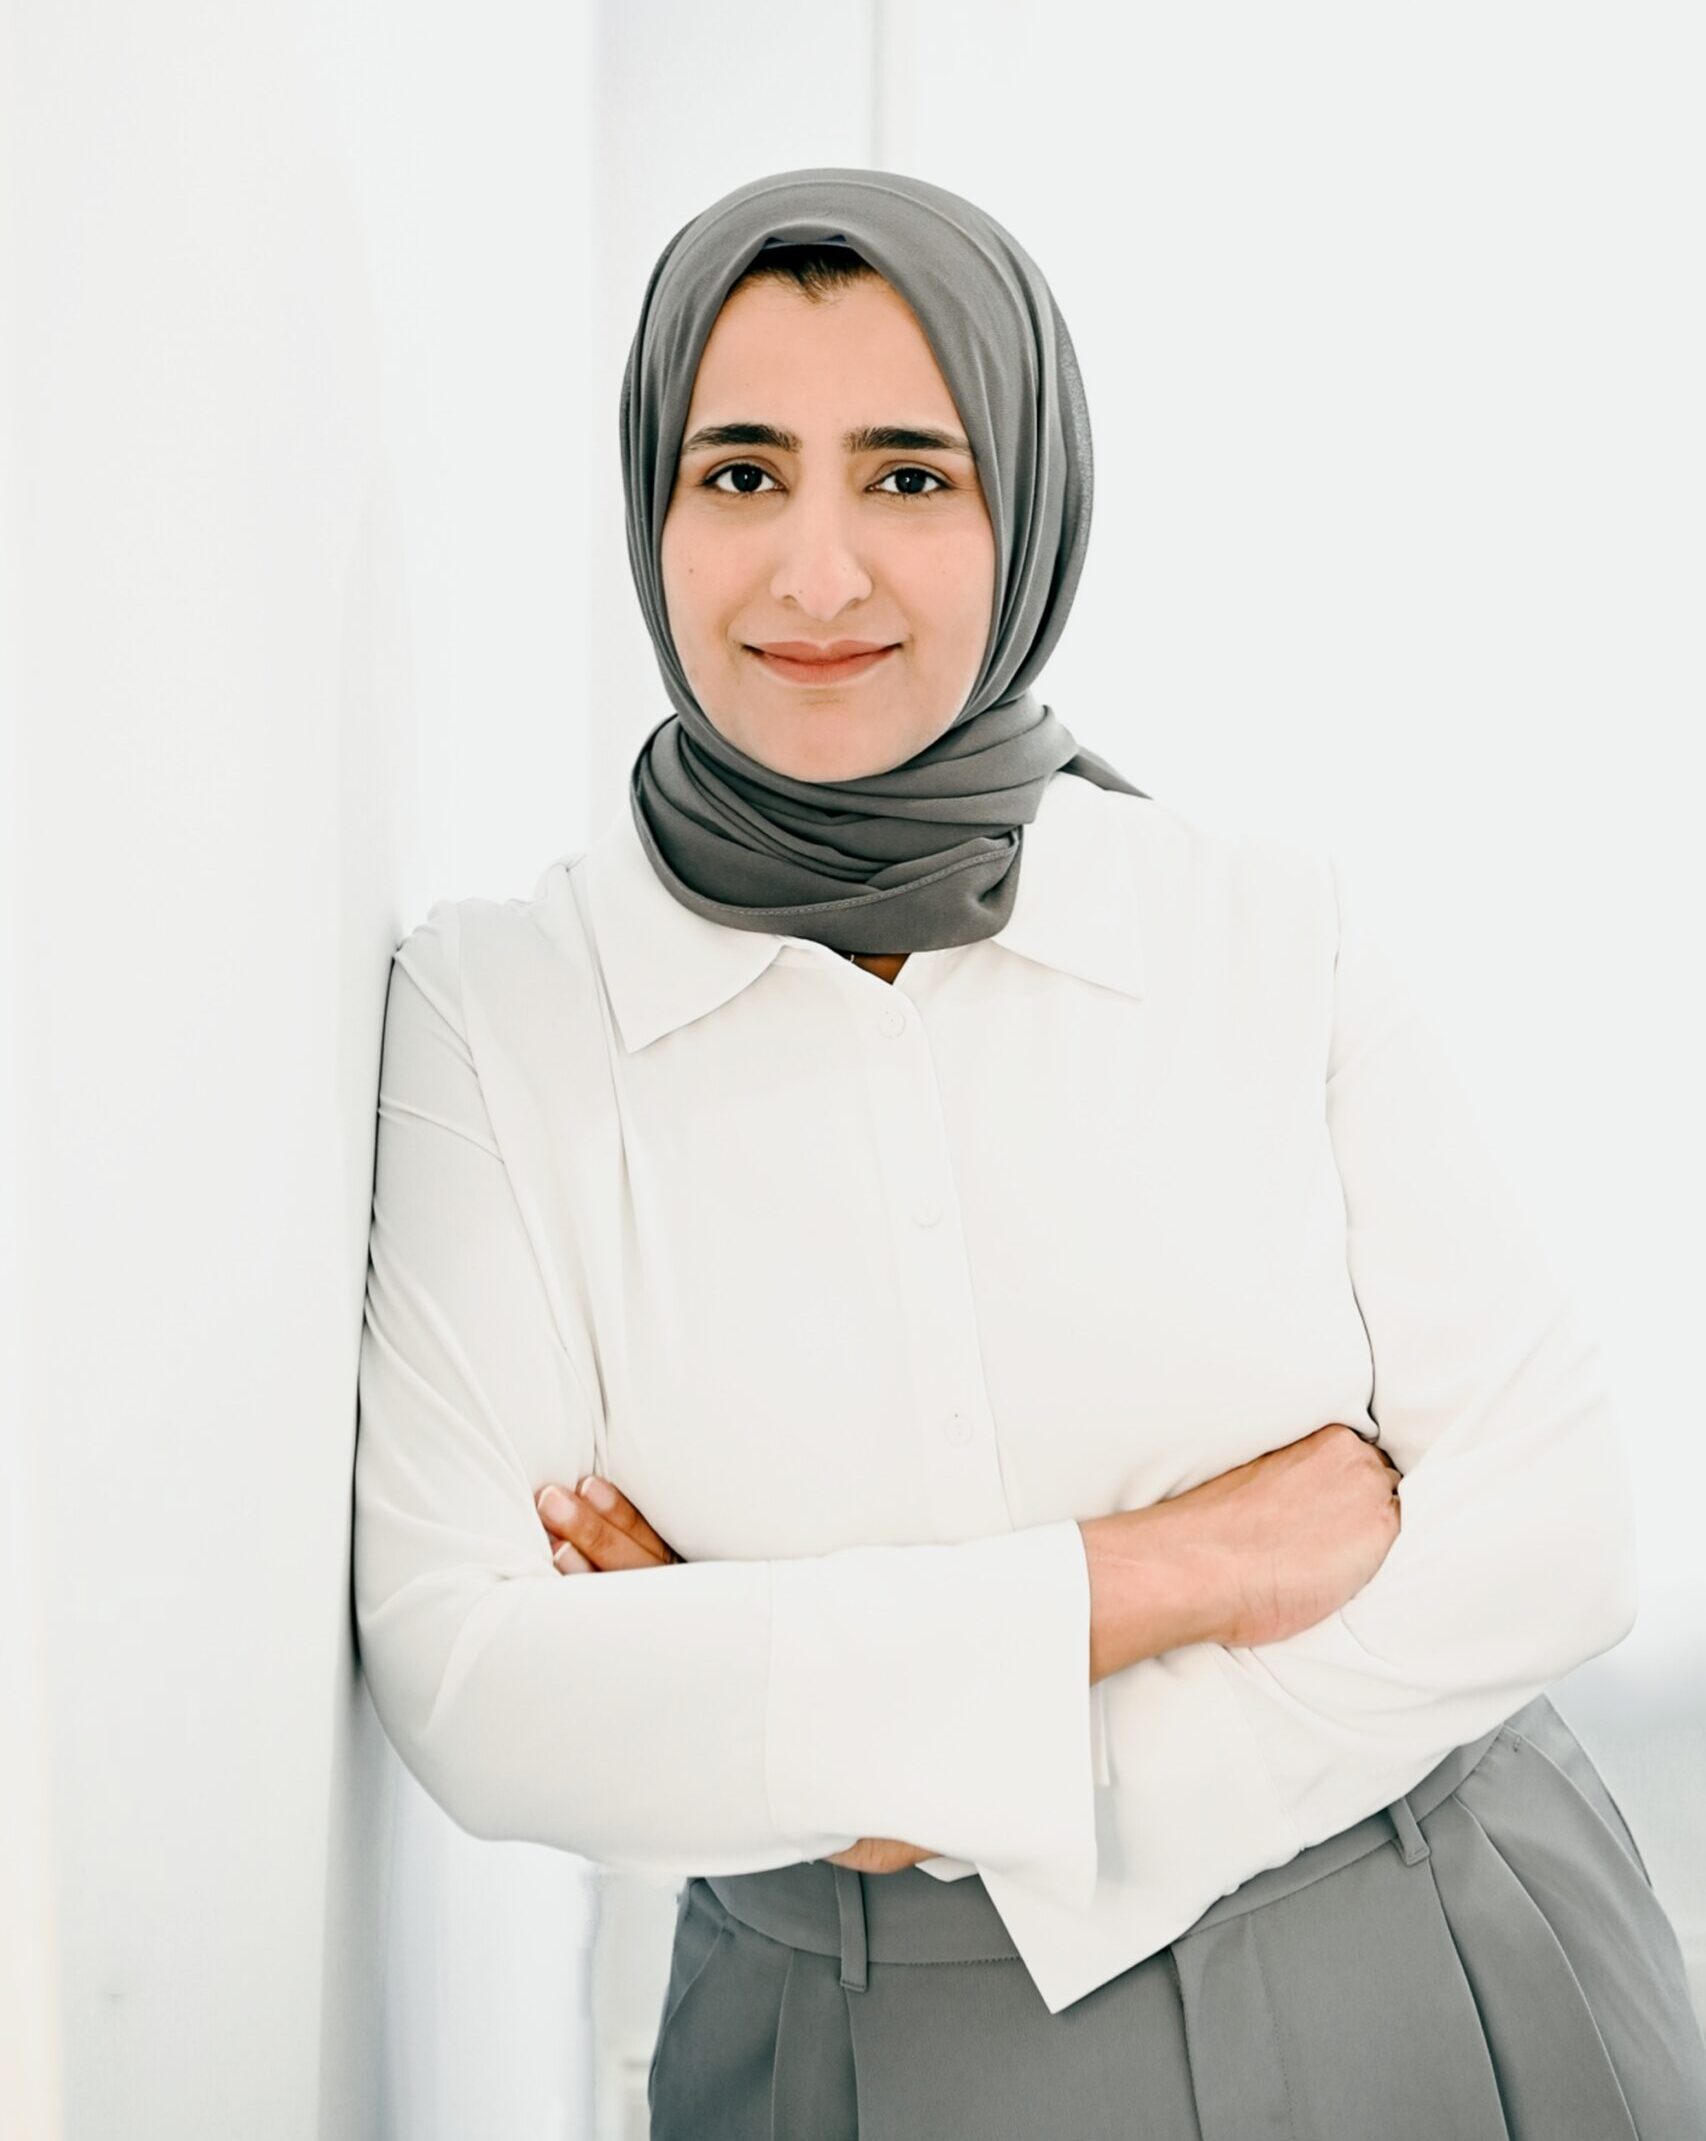 Portrait of Benazir, middle eastern woman wearing white blouse and grey hijab